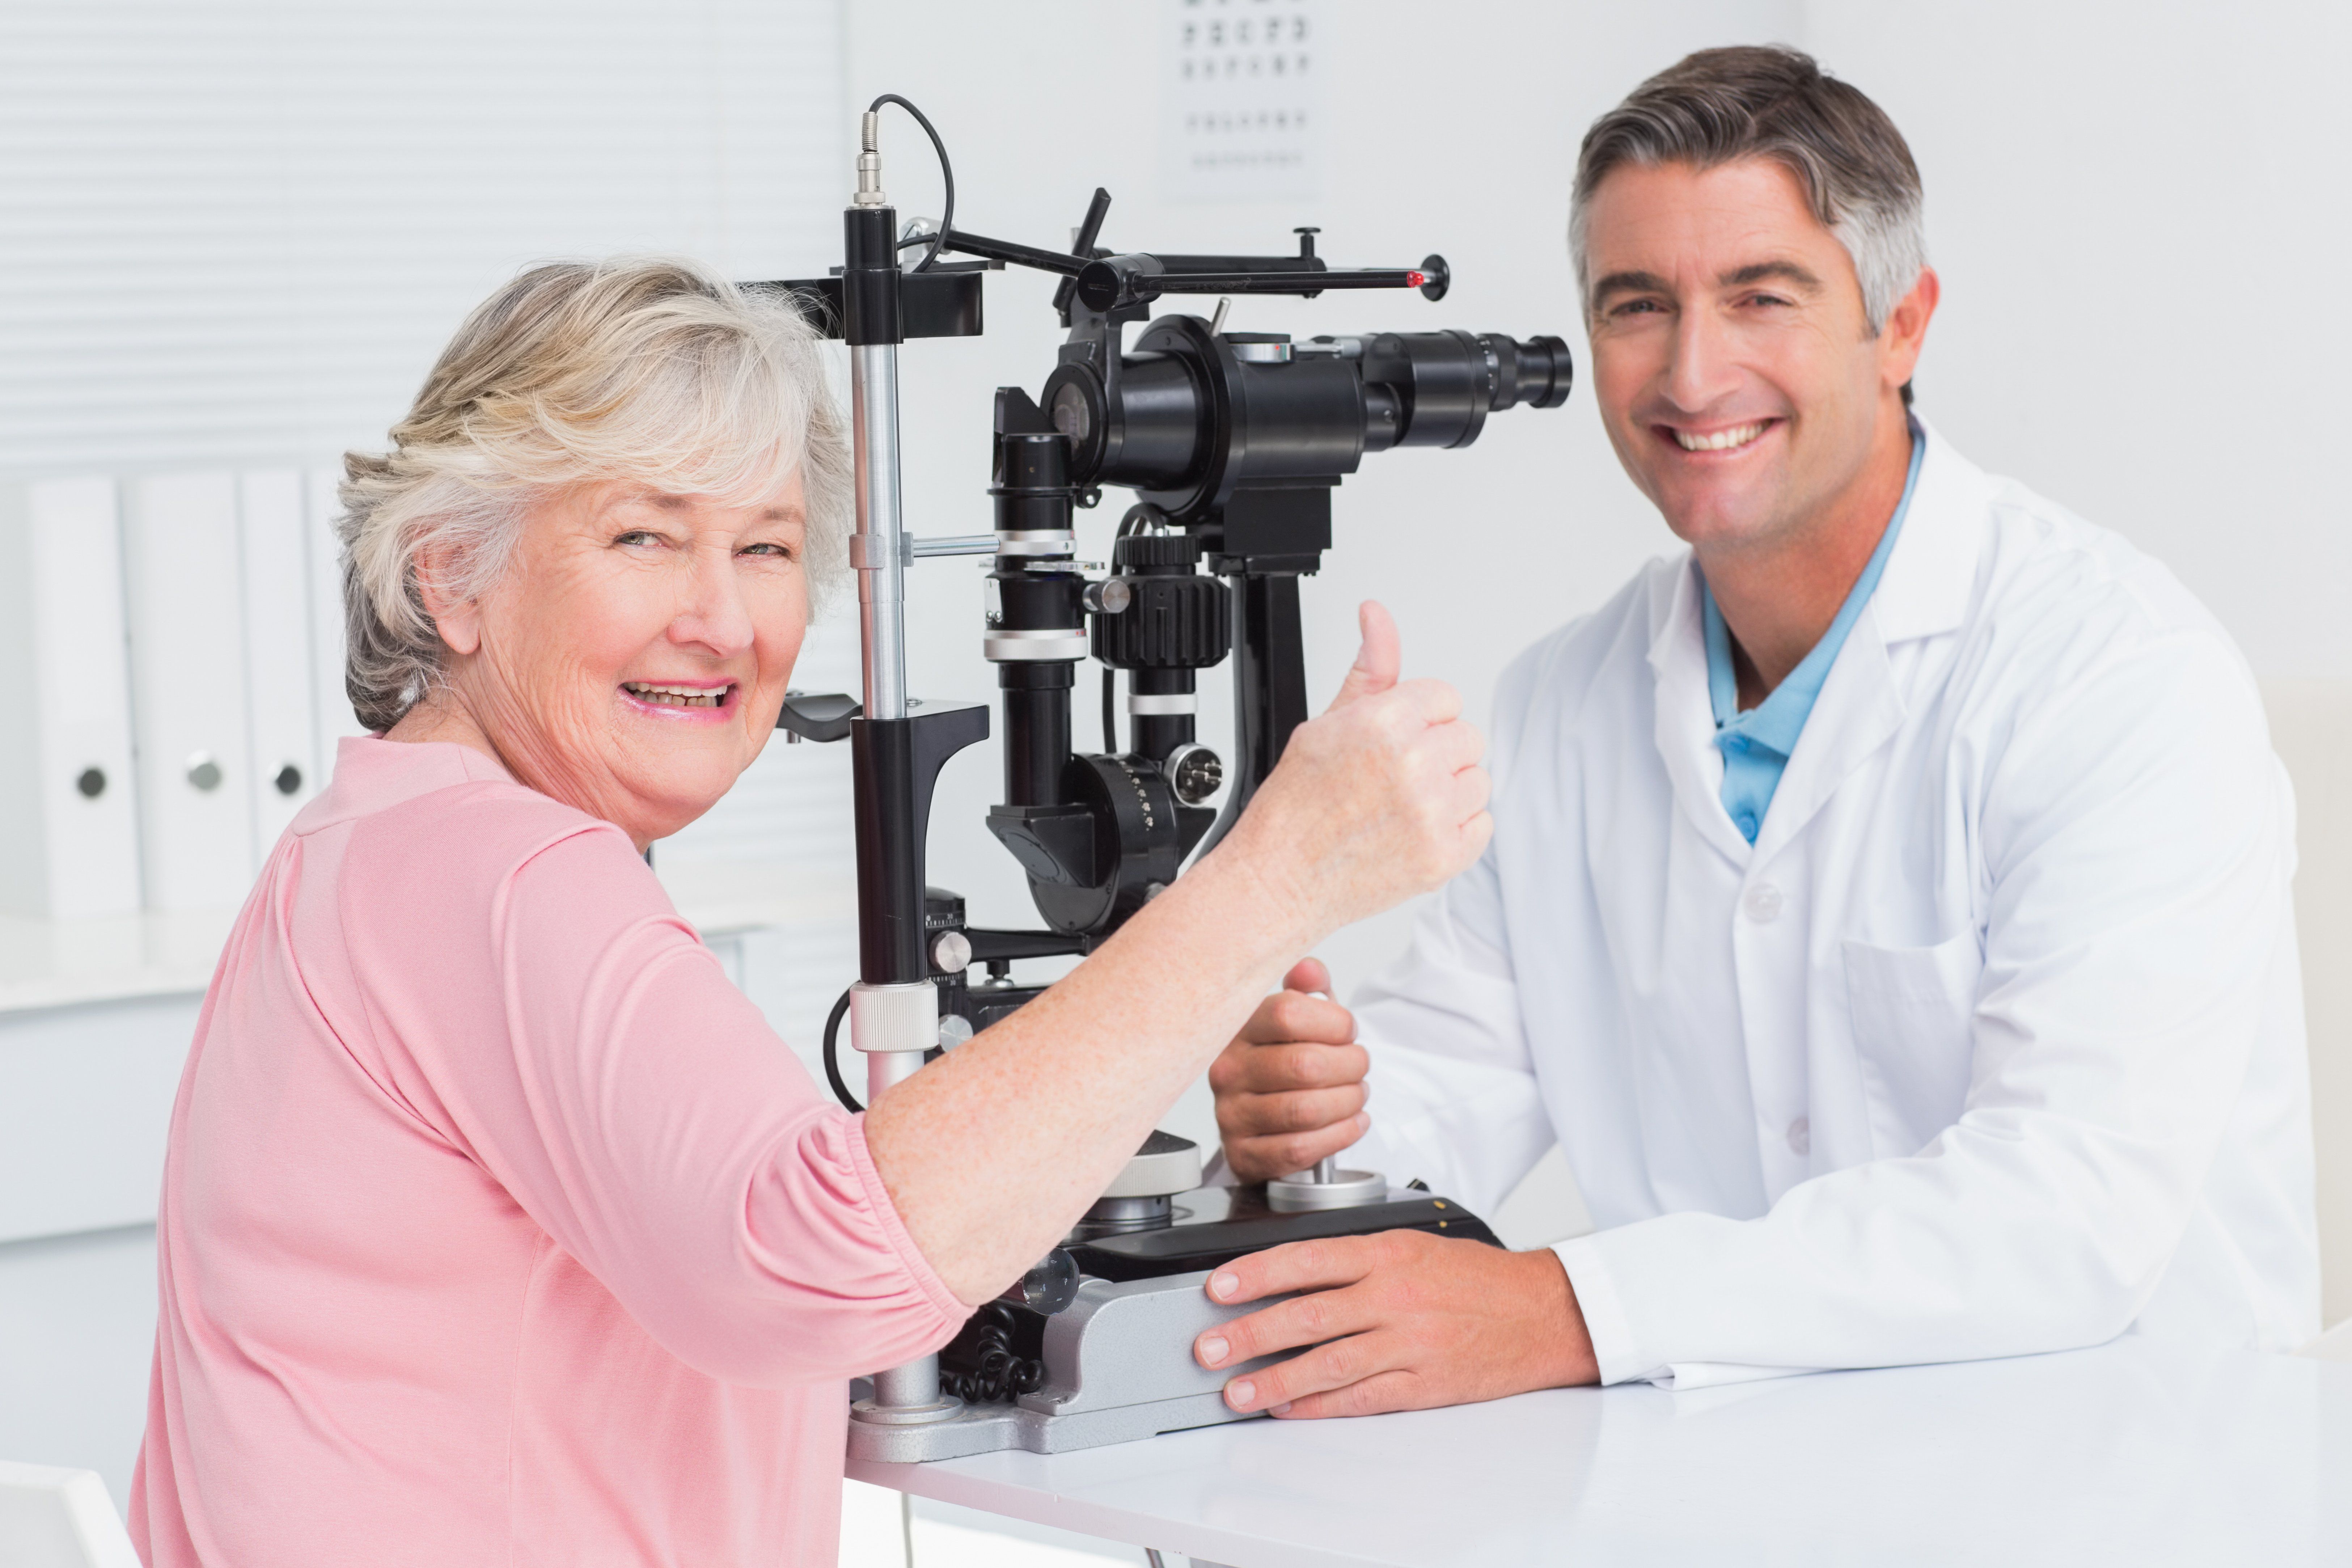 The 6 Qualities That Make a Great Optometrist